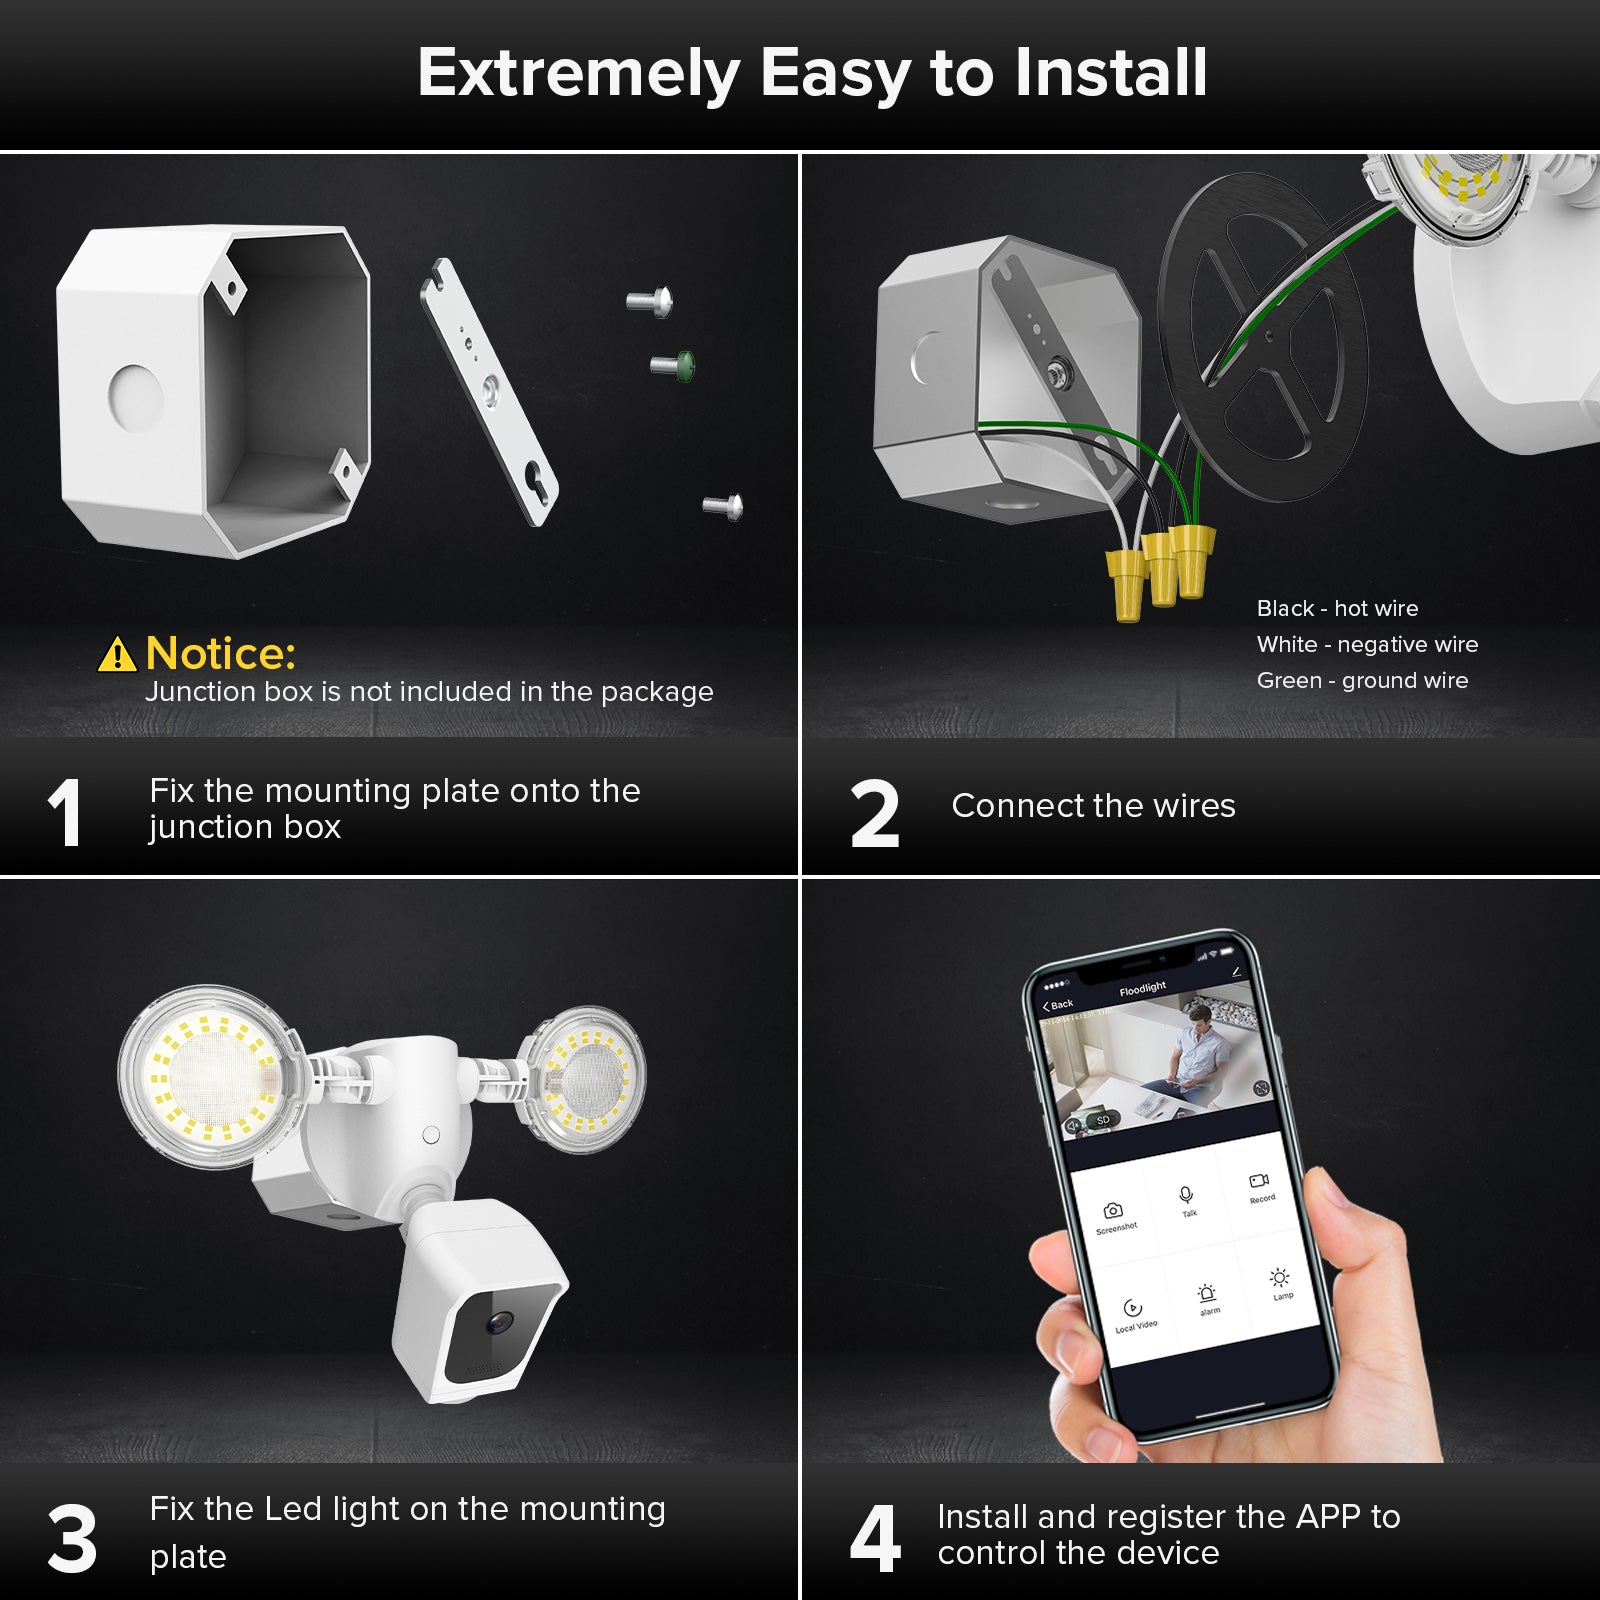 35W Smart Led Security Light (With Camera&Motion Sensor), extremely easy to install